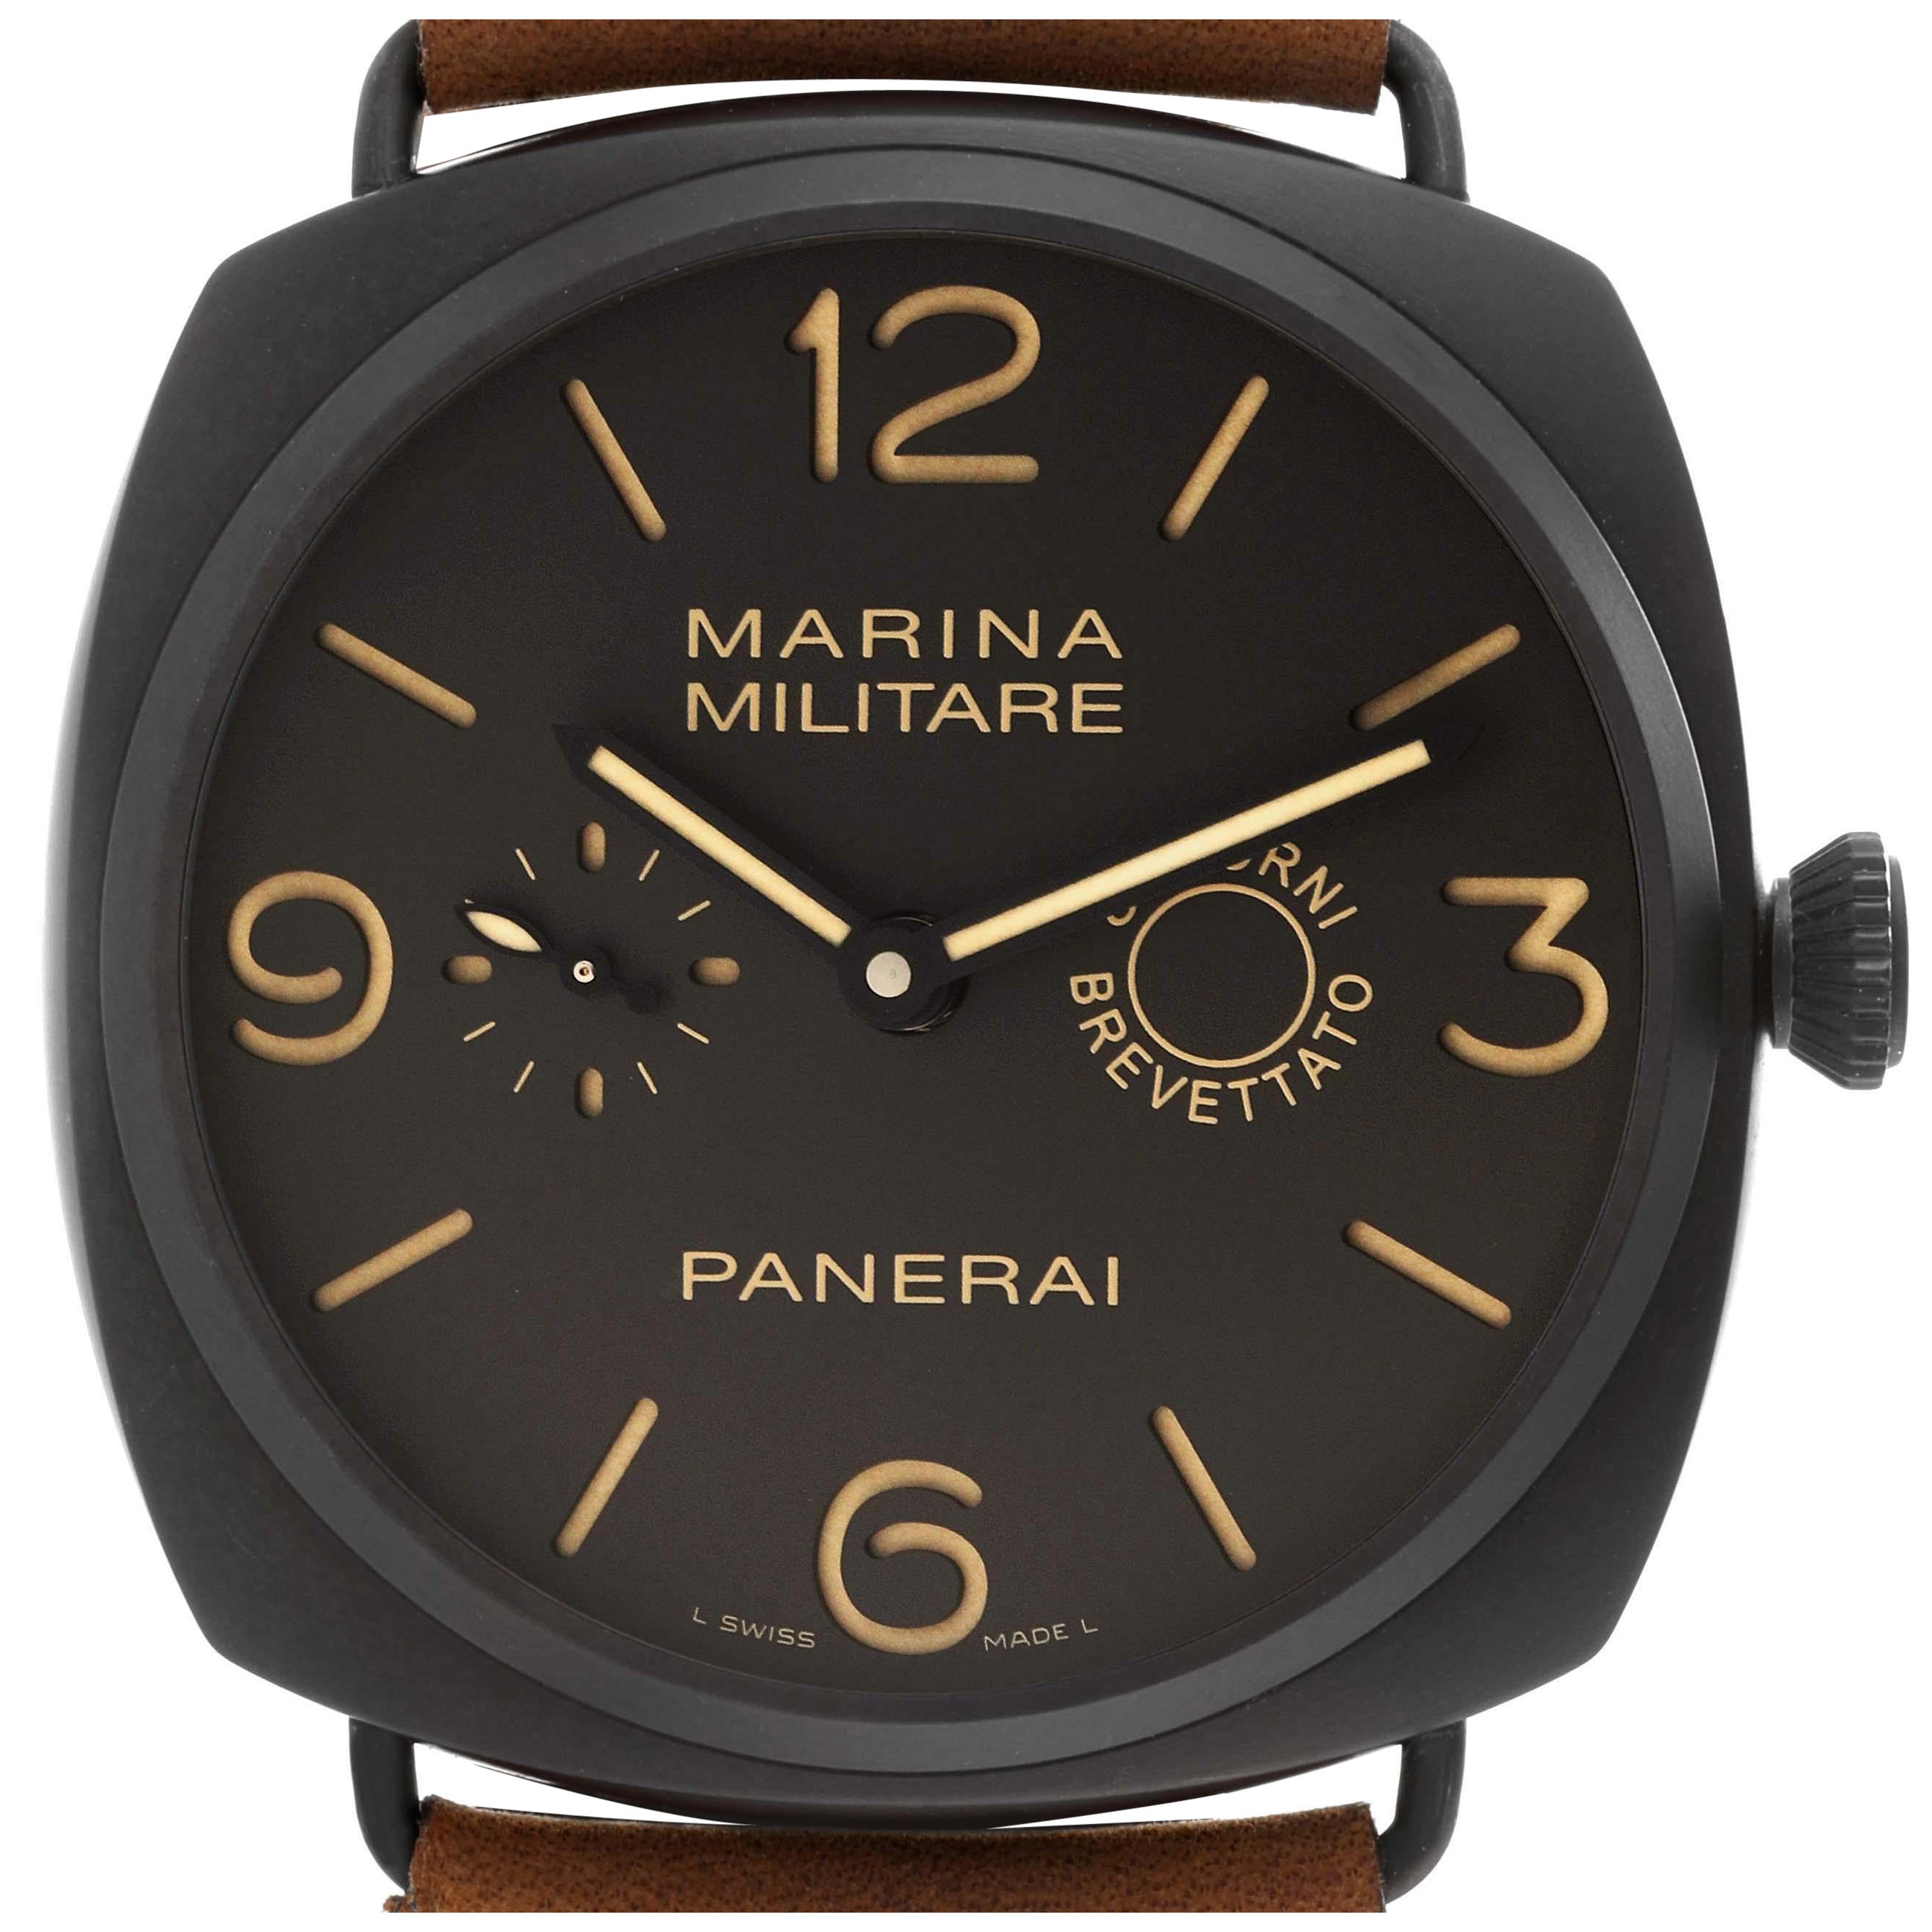 Panerai Radiomir Composite Marina Militare 8 Mens Watch PAM00339 Box Papers For Sale